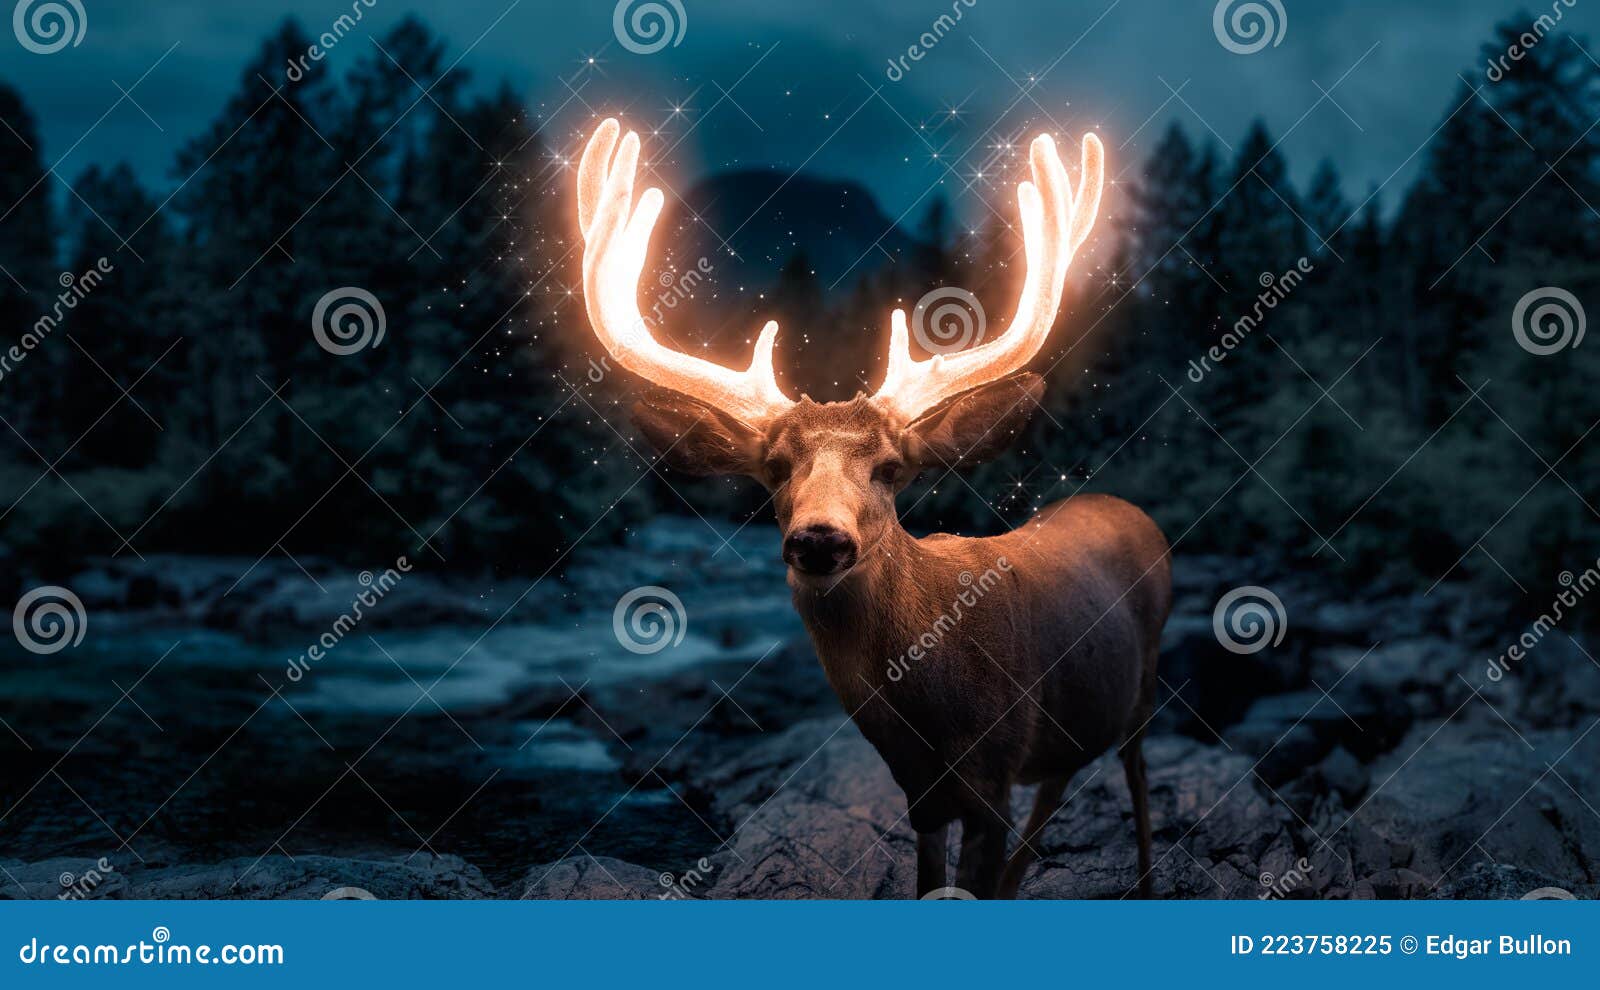 Male Deer With Glowing Antlers Magical Artistic Render Stock Image